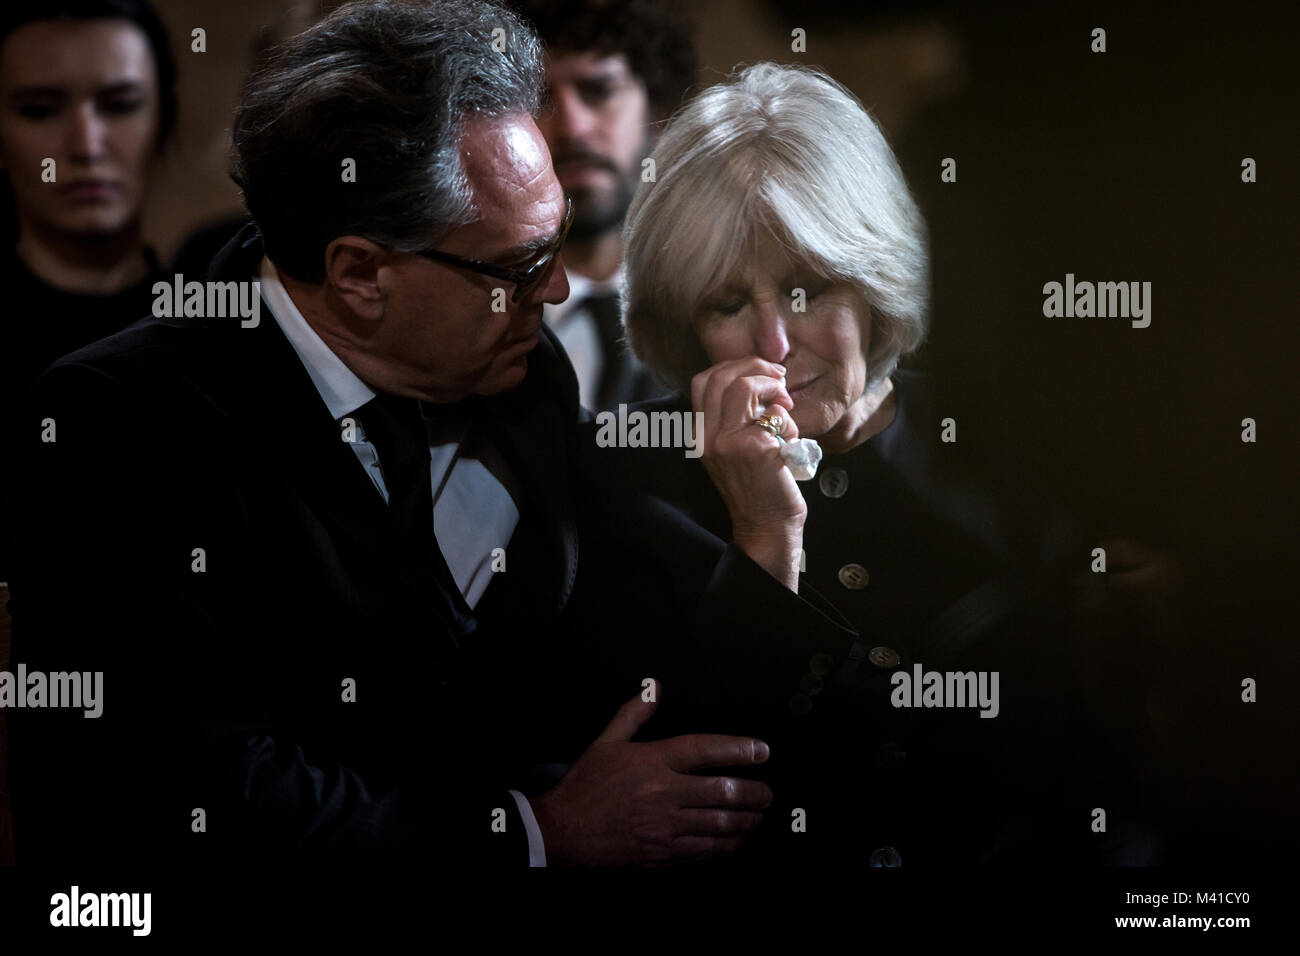 Senior woman being comforted at a funeral Stock Photo